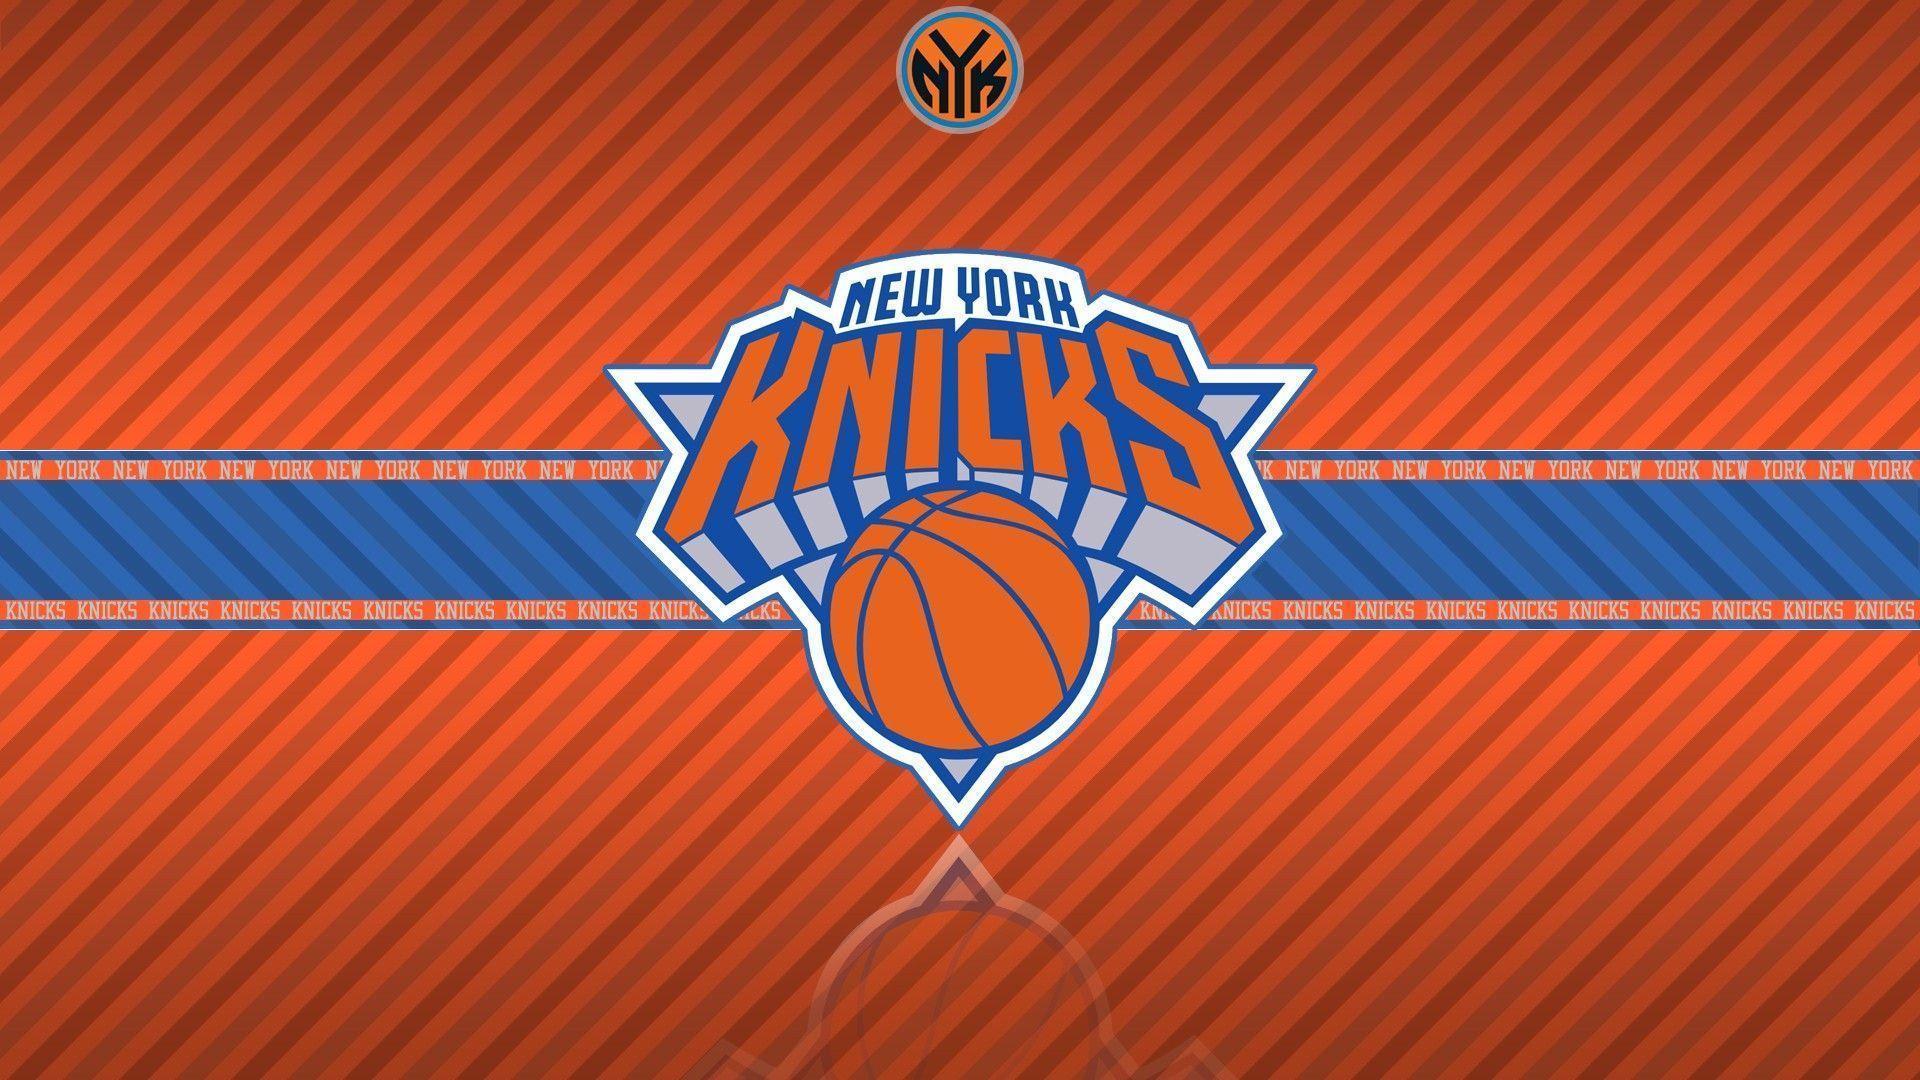 New York Knicks Wallpapers - Top Free